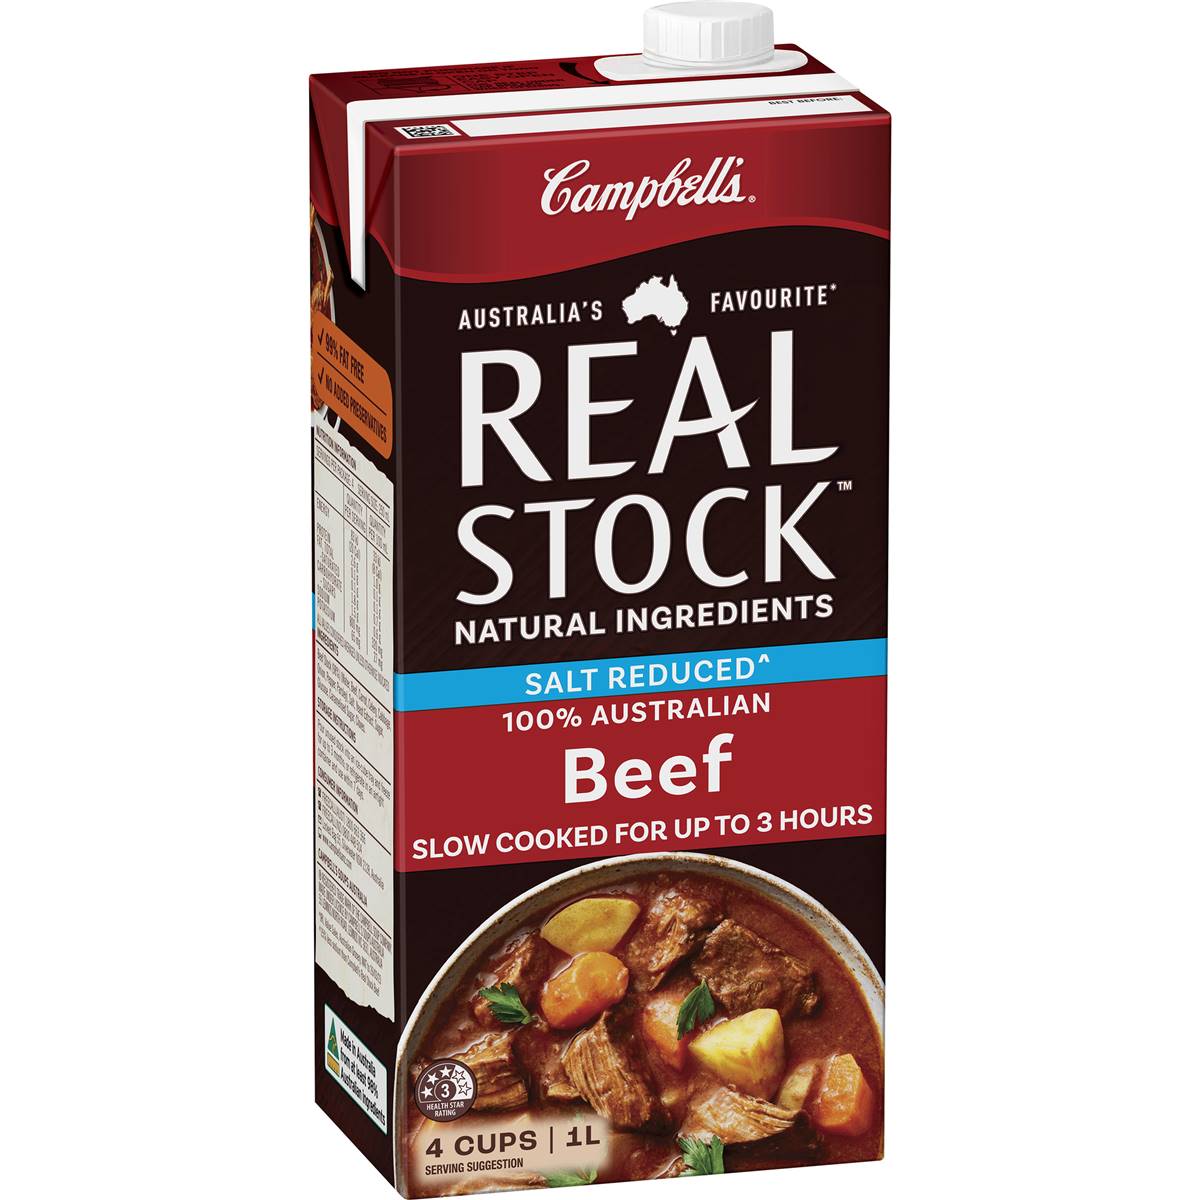 Calories in Campbell's Real Stock Beef Salt Reduced Liquid Stock